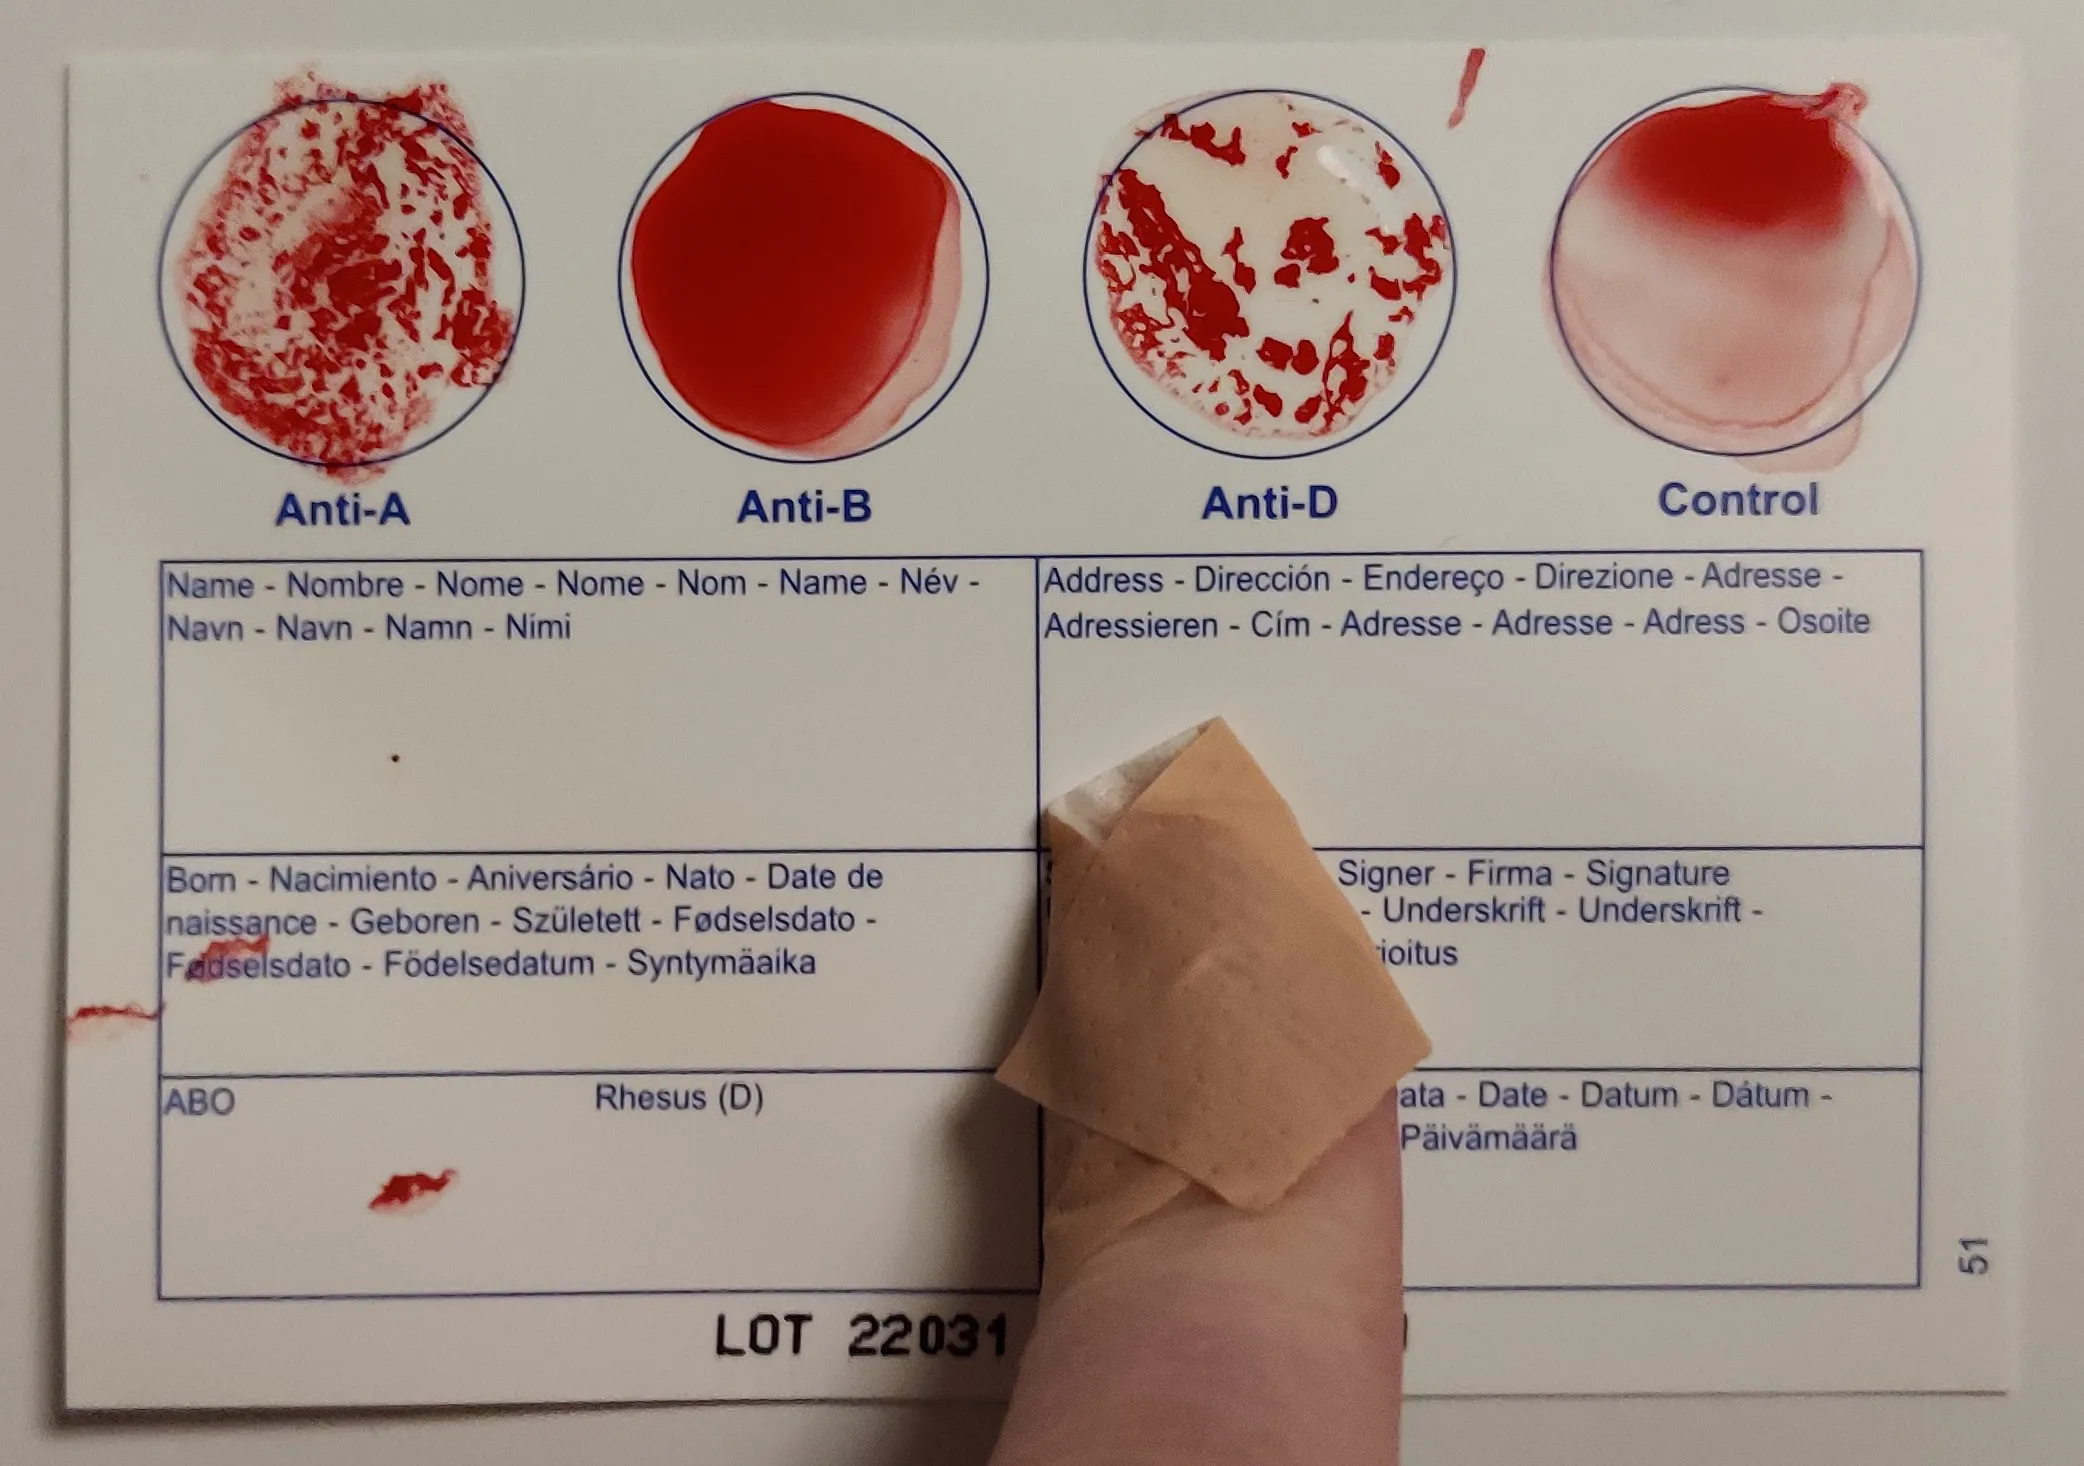 Used Eldoncard with the four circles covered in blood. Bandaged finger shown in foreground.